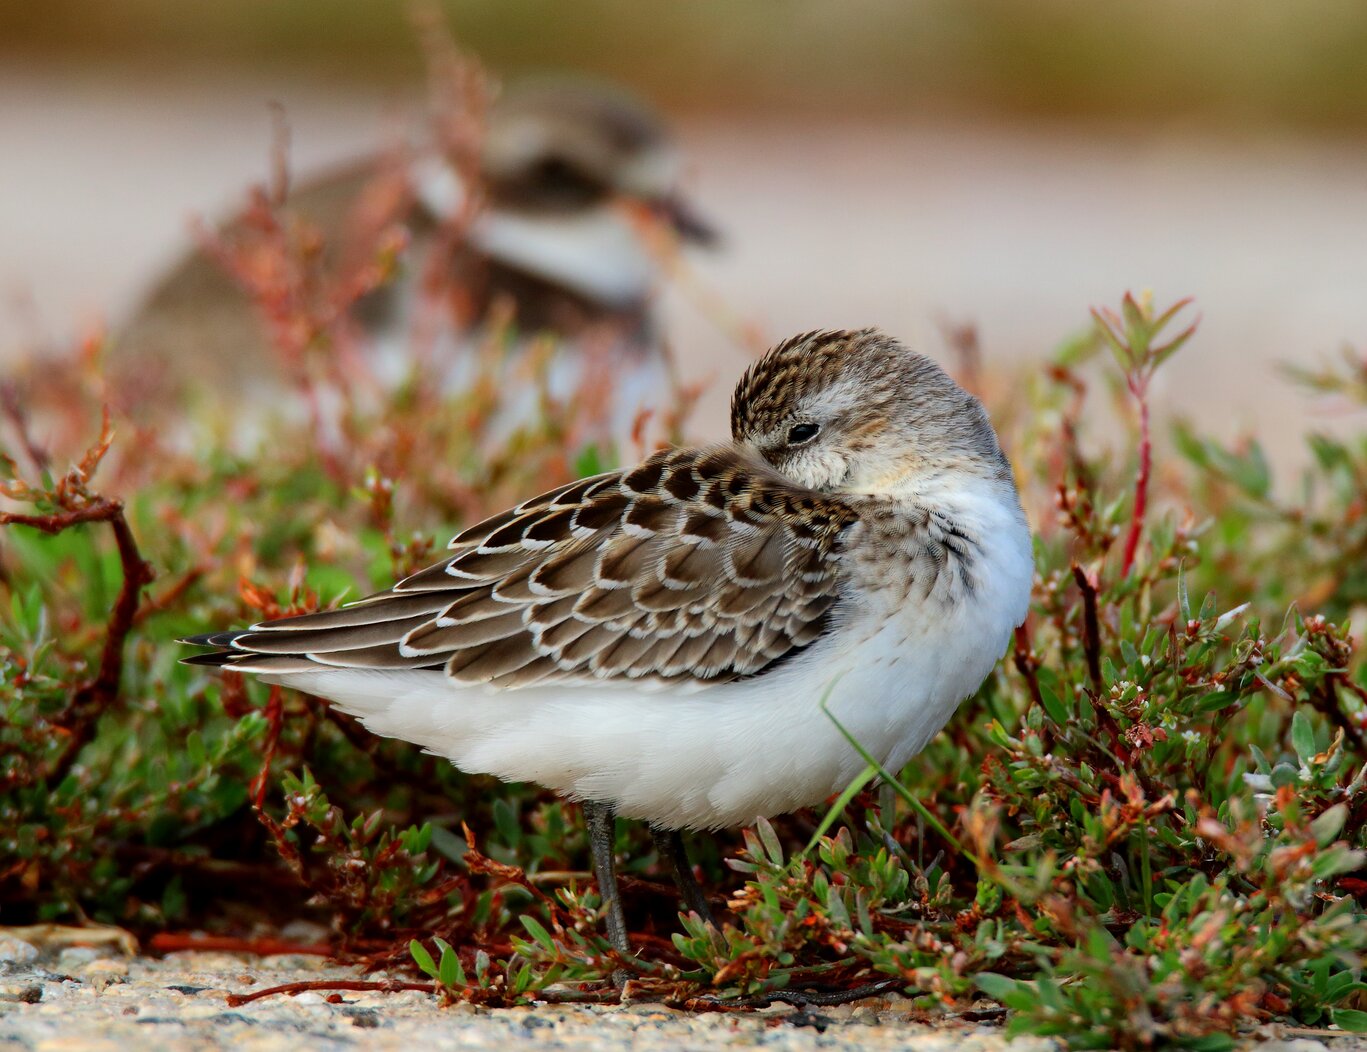 A Semipalmated Sandpiper AND Semipalmated Plover at Miller Field. Photo: Isaac Grant